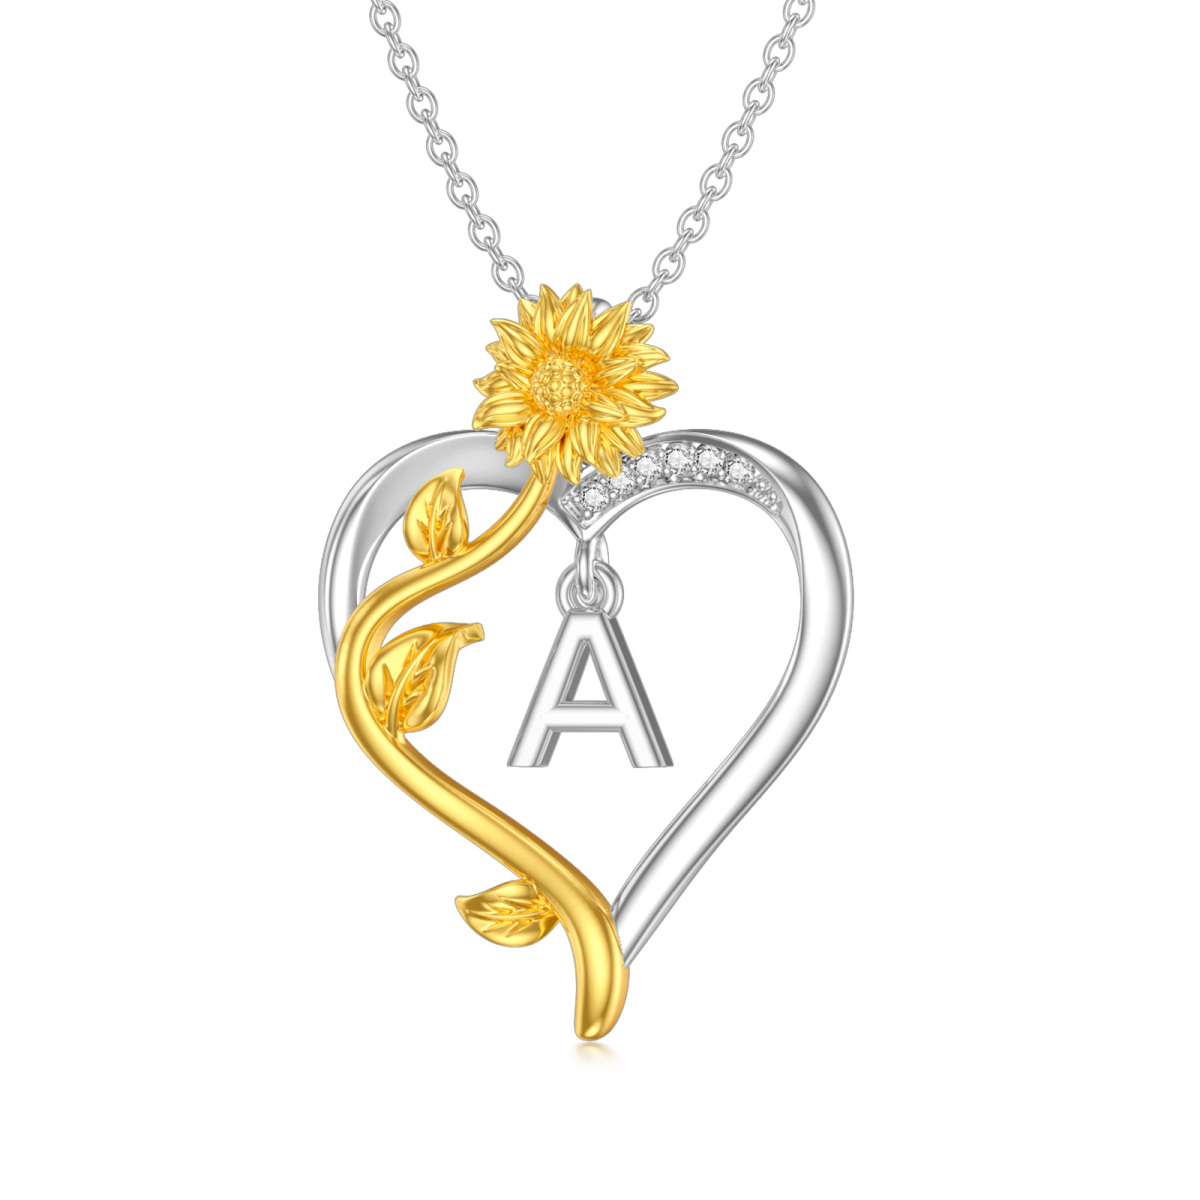 Sterling Silver Two-tone Circular Shaped Cubic Zirconia Sunflower & Heart Pendant Necklace with Initial Letter A-1